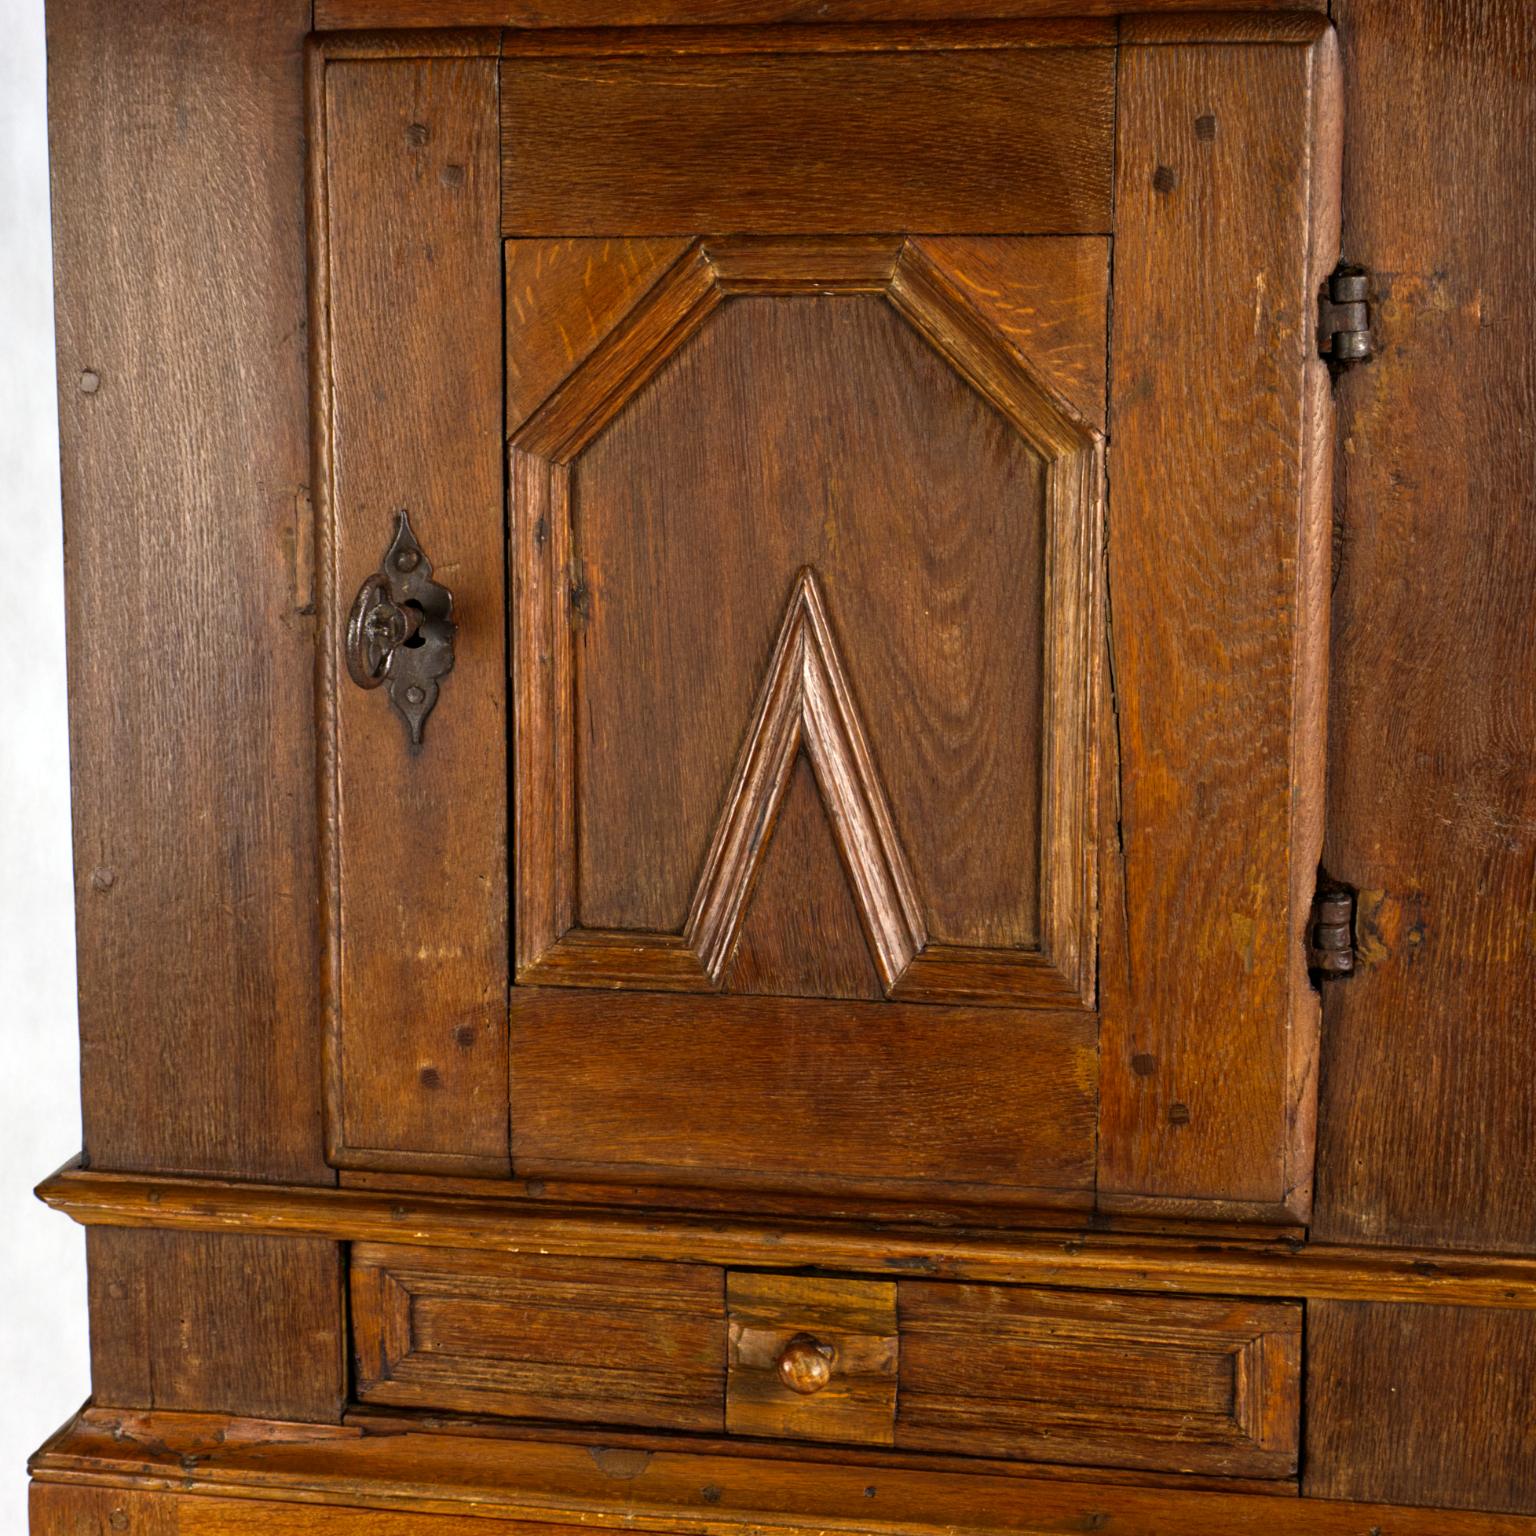 This amazing Danish Baroque oak cabinet is made at the beginning 18th century. In the past, the lower drawer was apparently repaired by a folk carver. The cabinet has an original and still functional lock with a massive original key. The entire